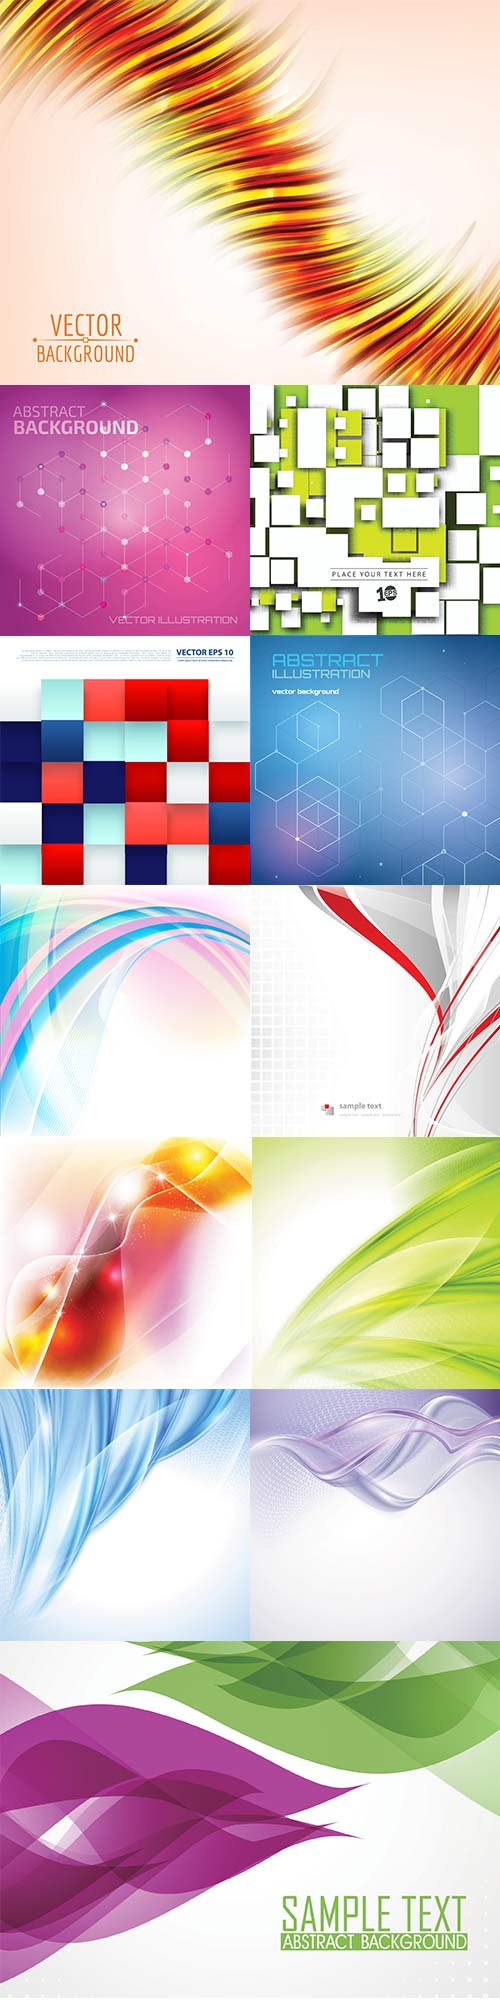 Bright colorful abstract backgrounds vector - 88